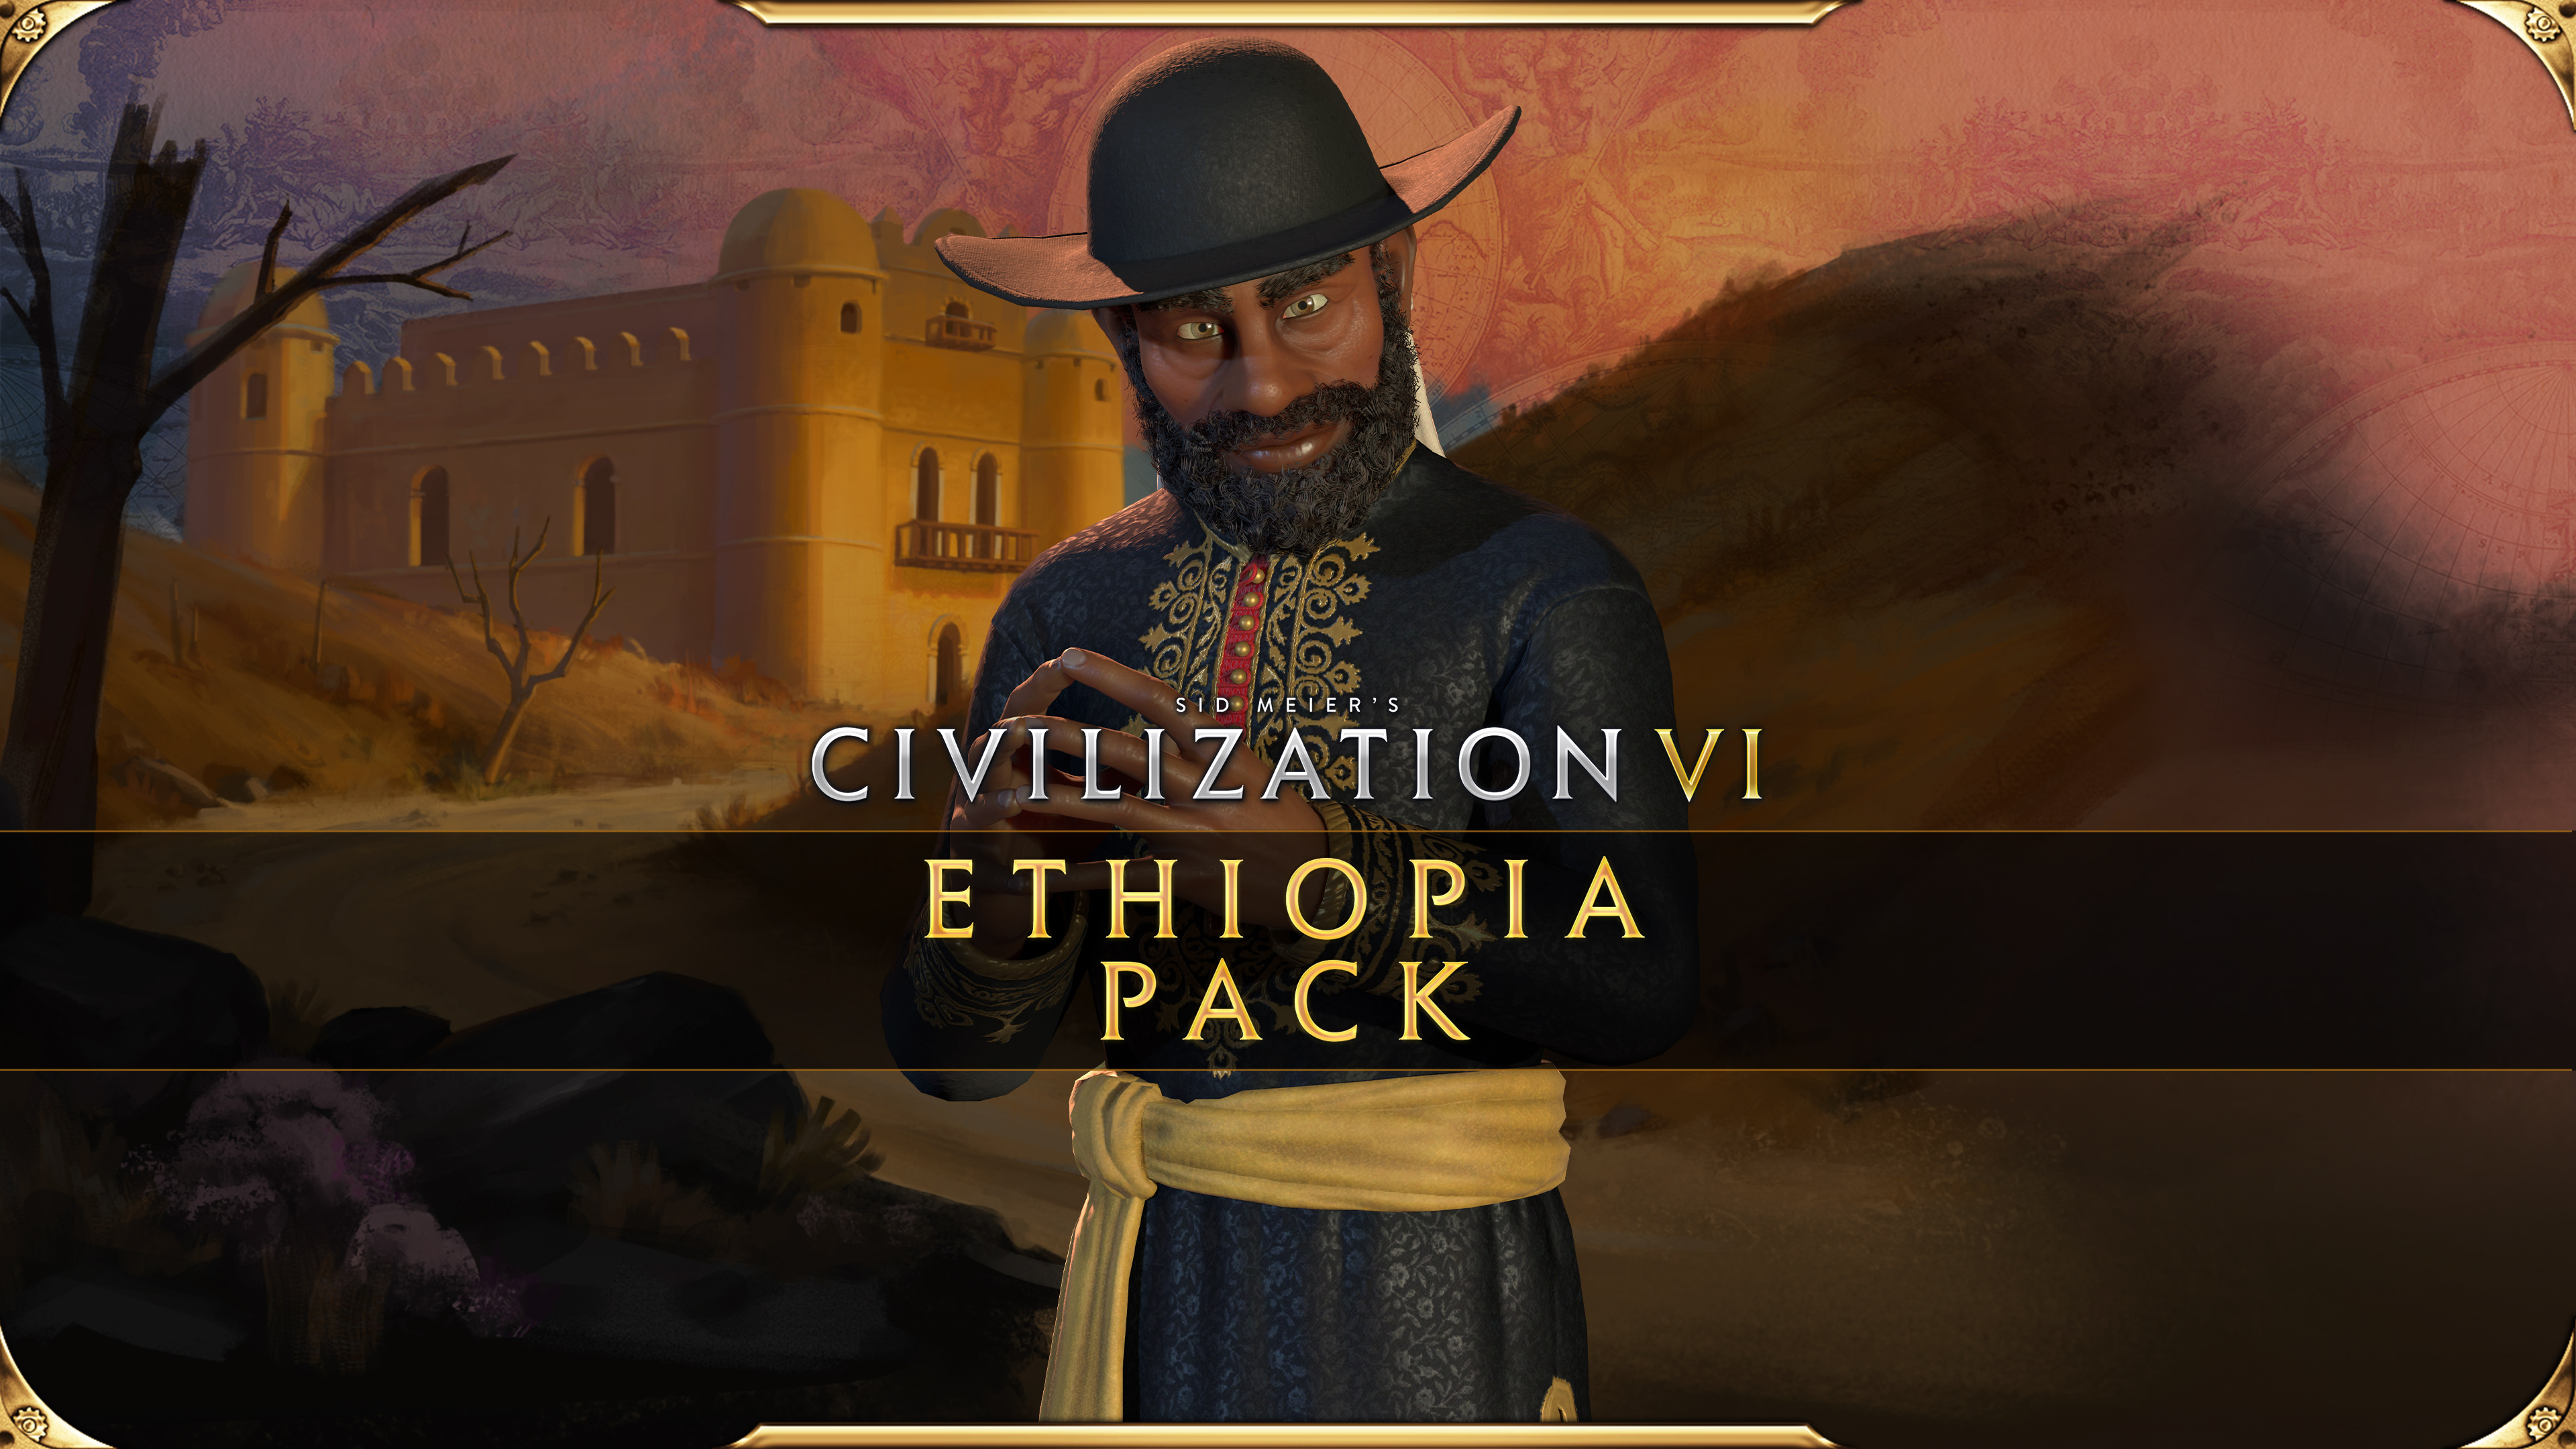 civ 6 new frontier ps4